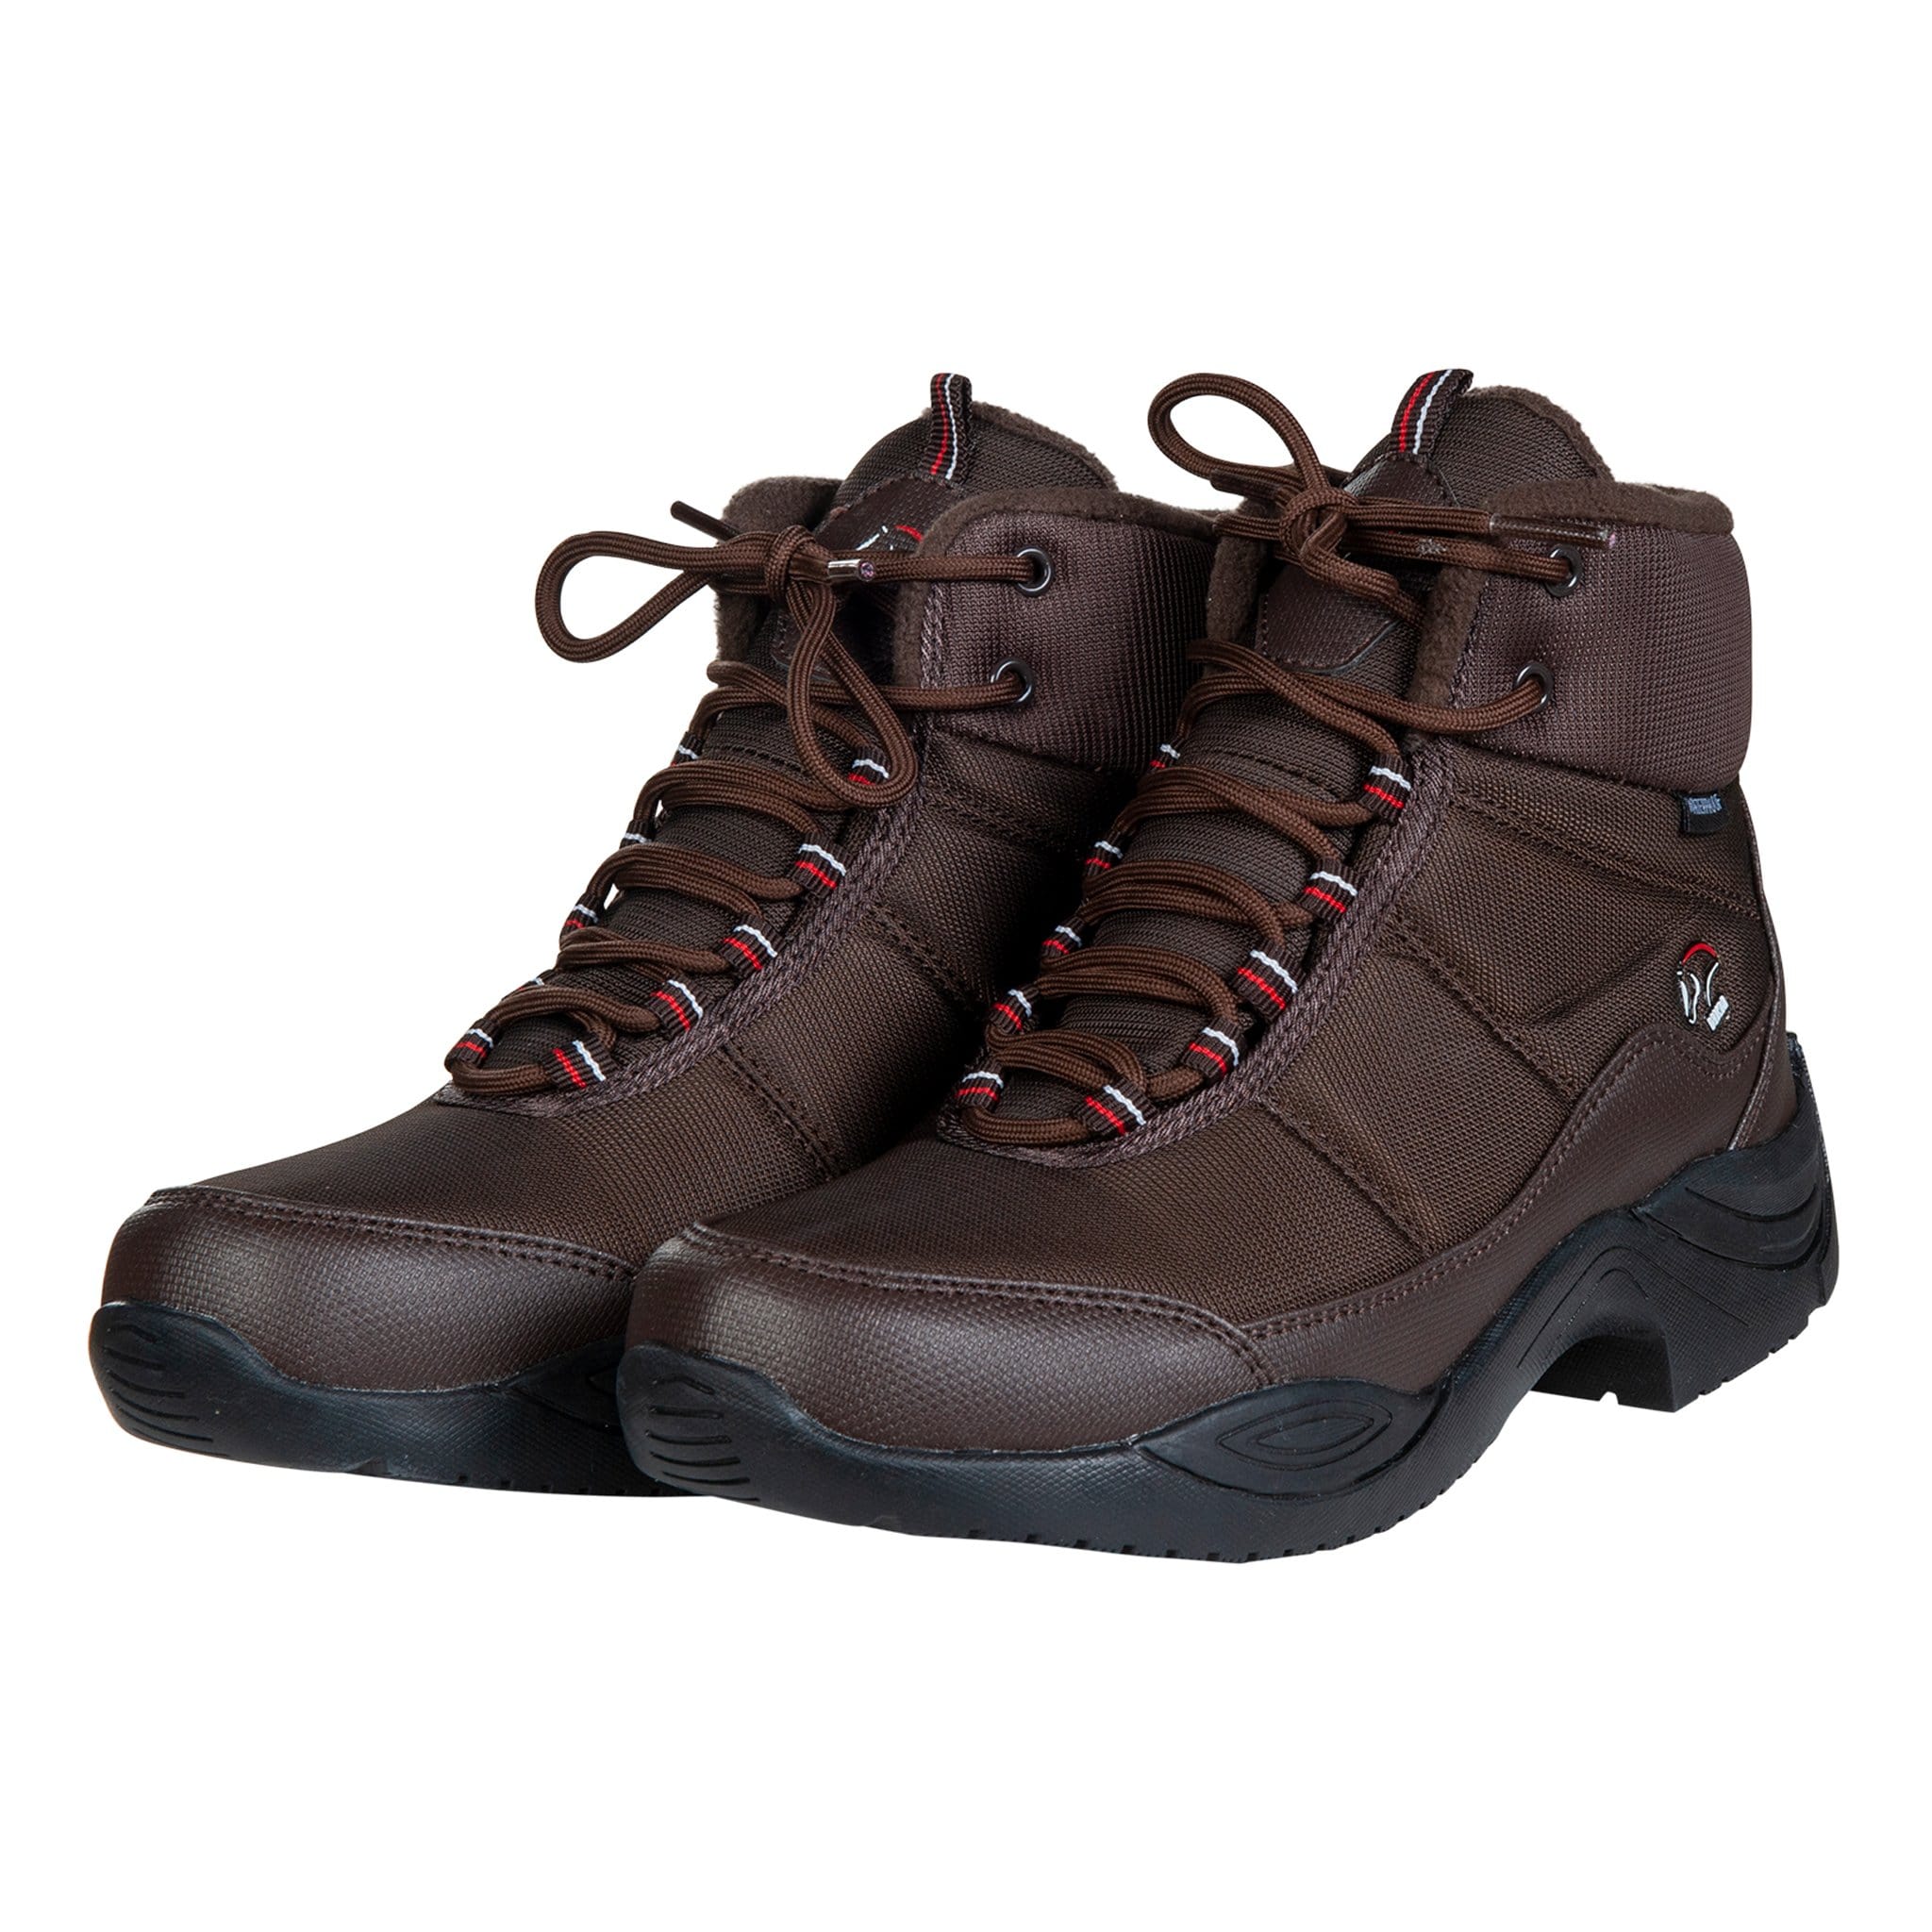 HKM Adventure Boots 12841 Brown Pair Front